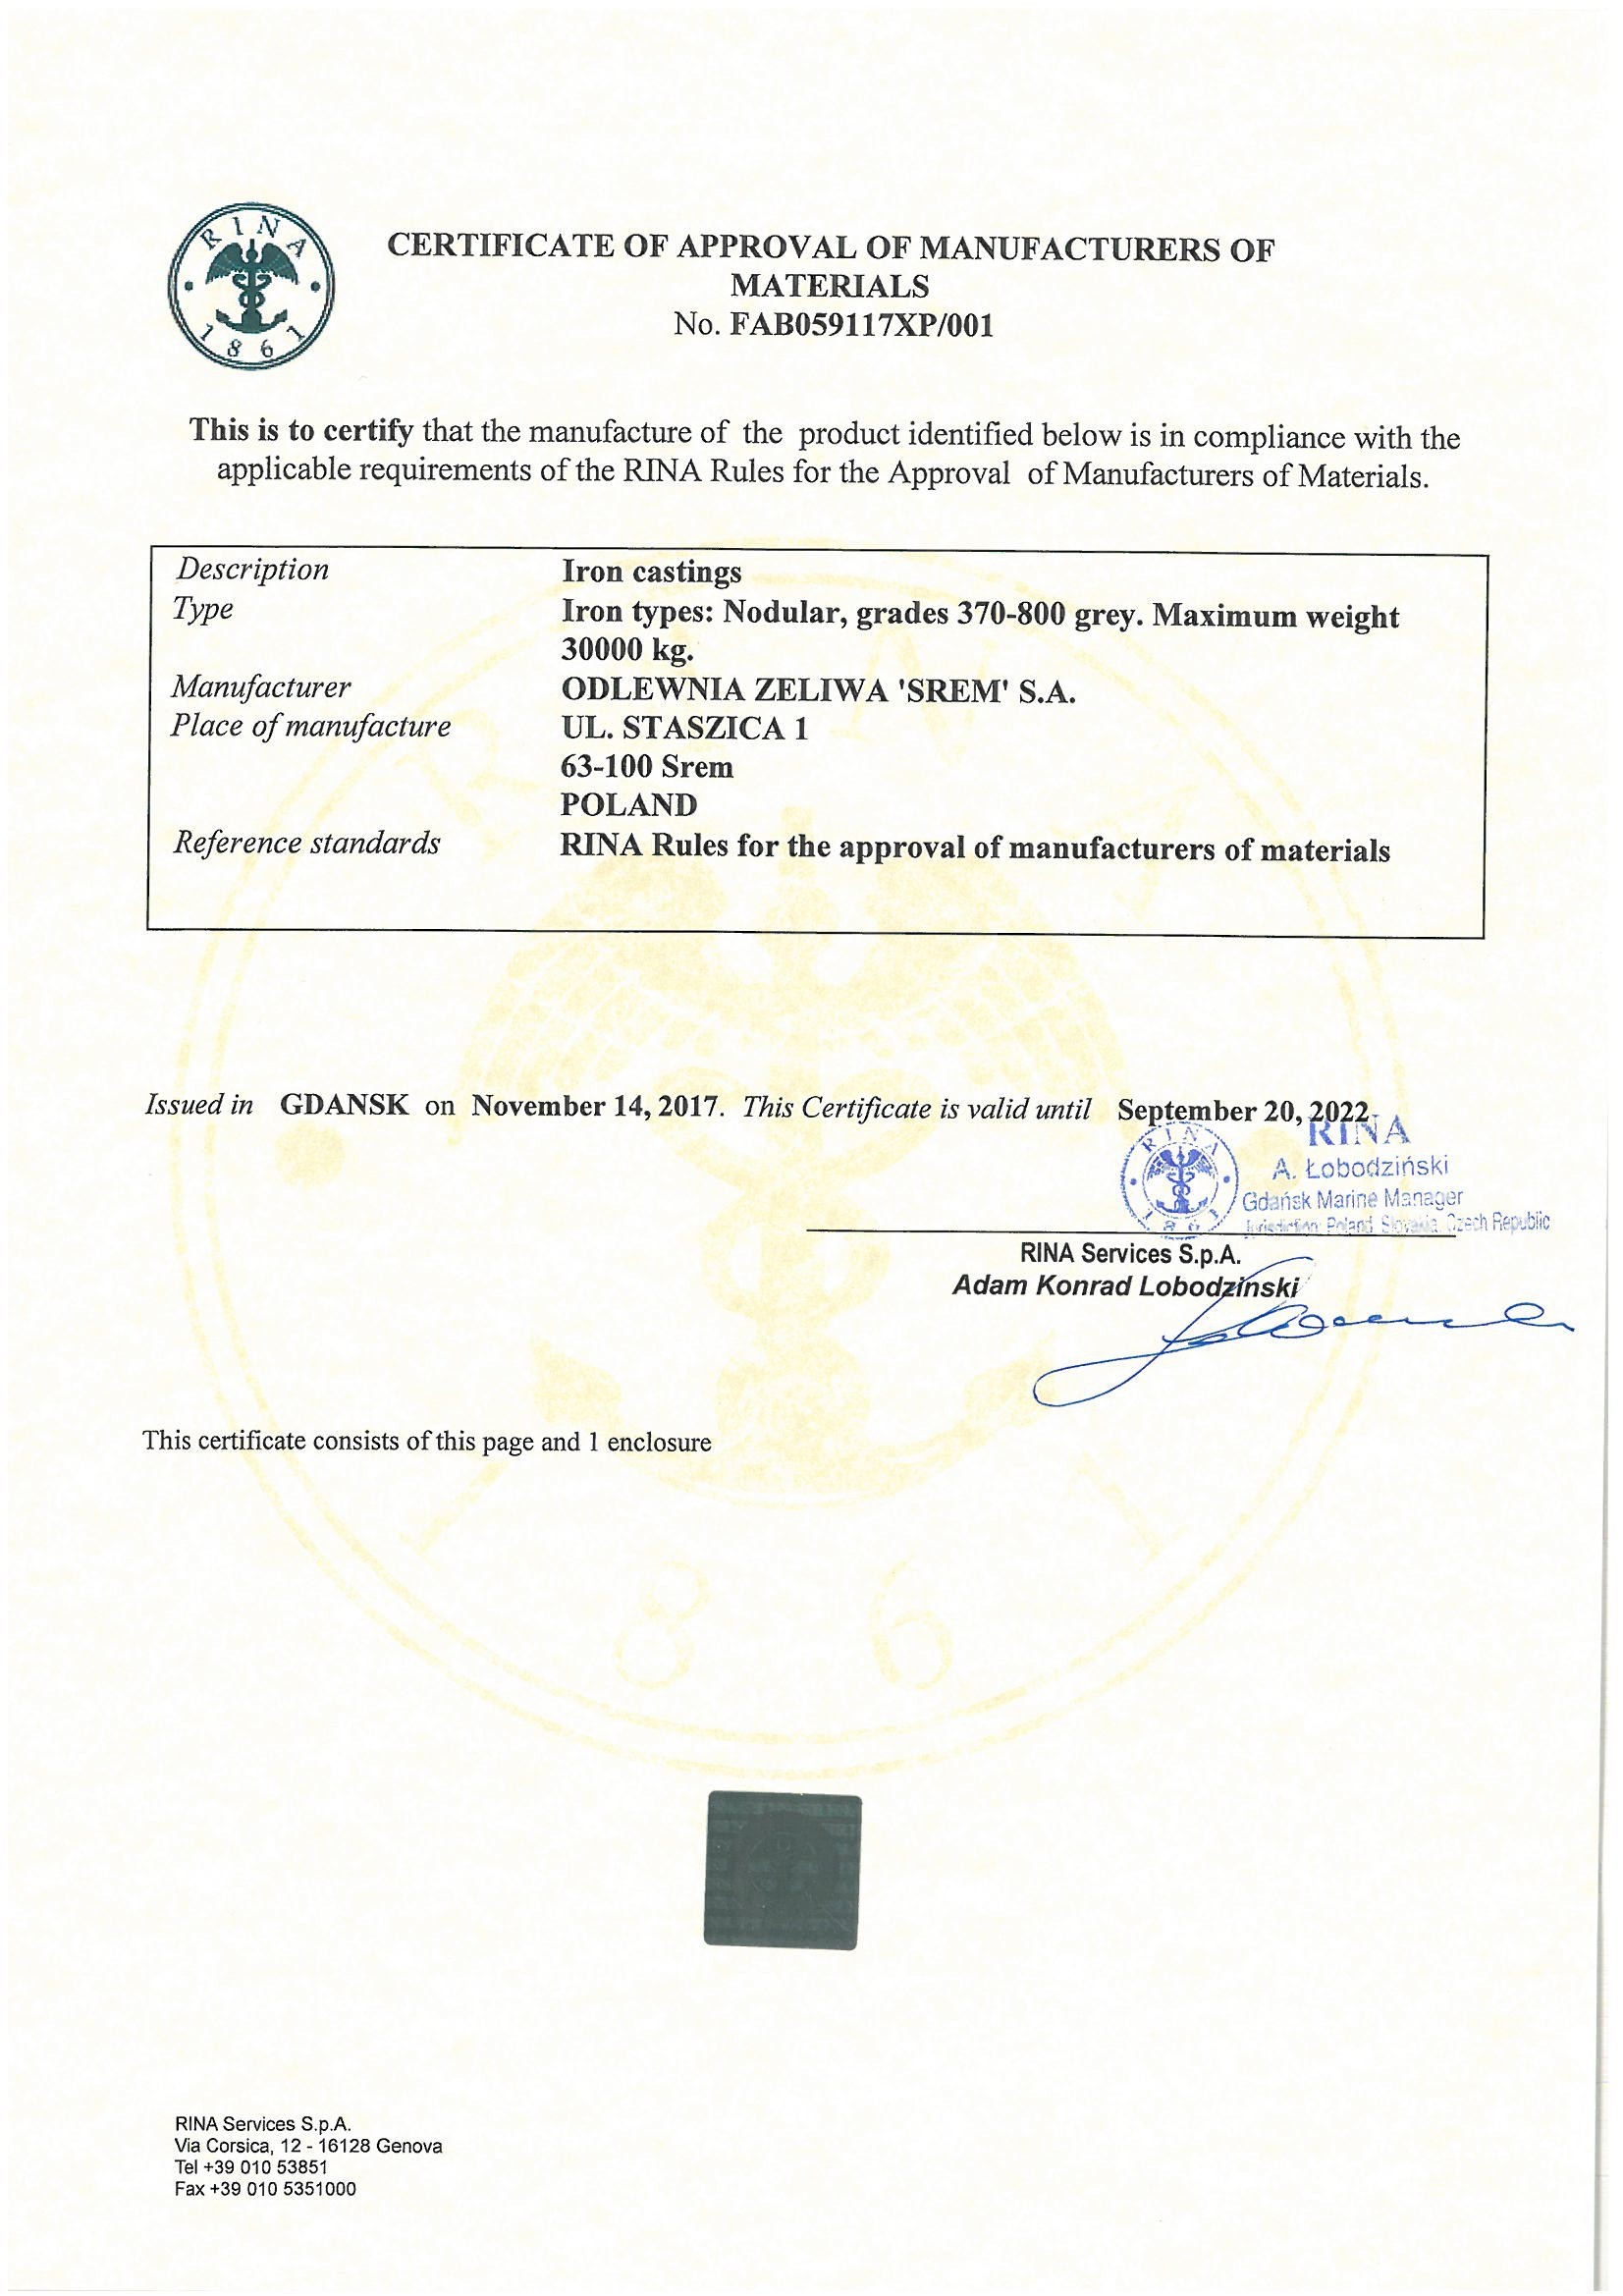 Certificate of Approval of Manufacturers of Materials